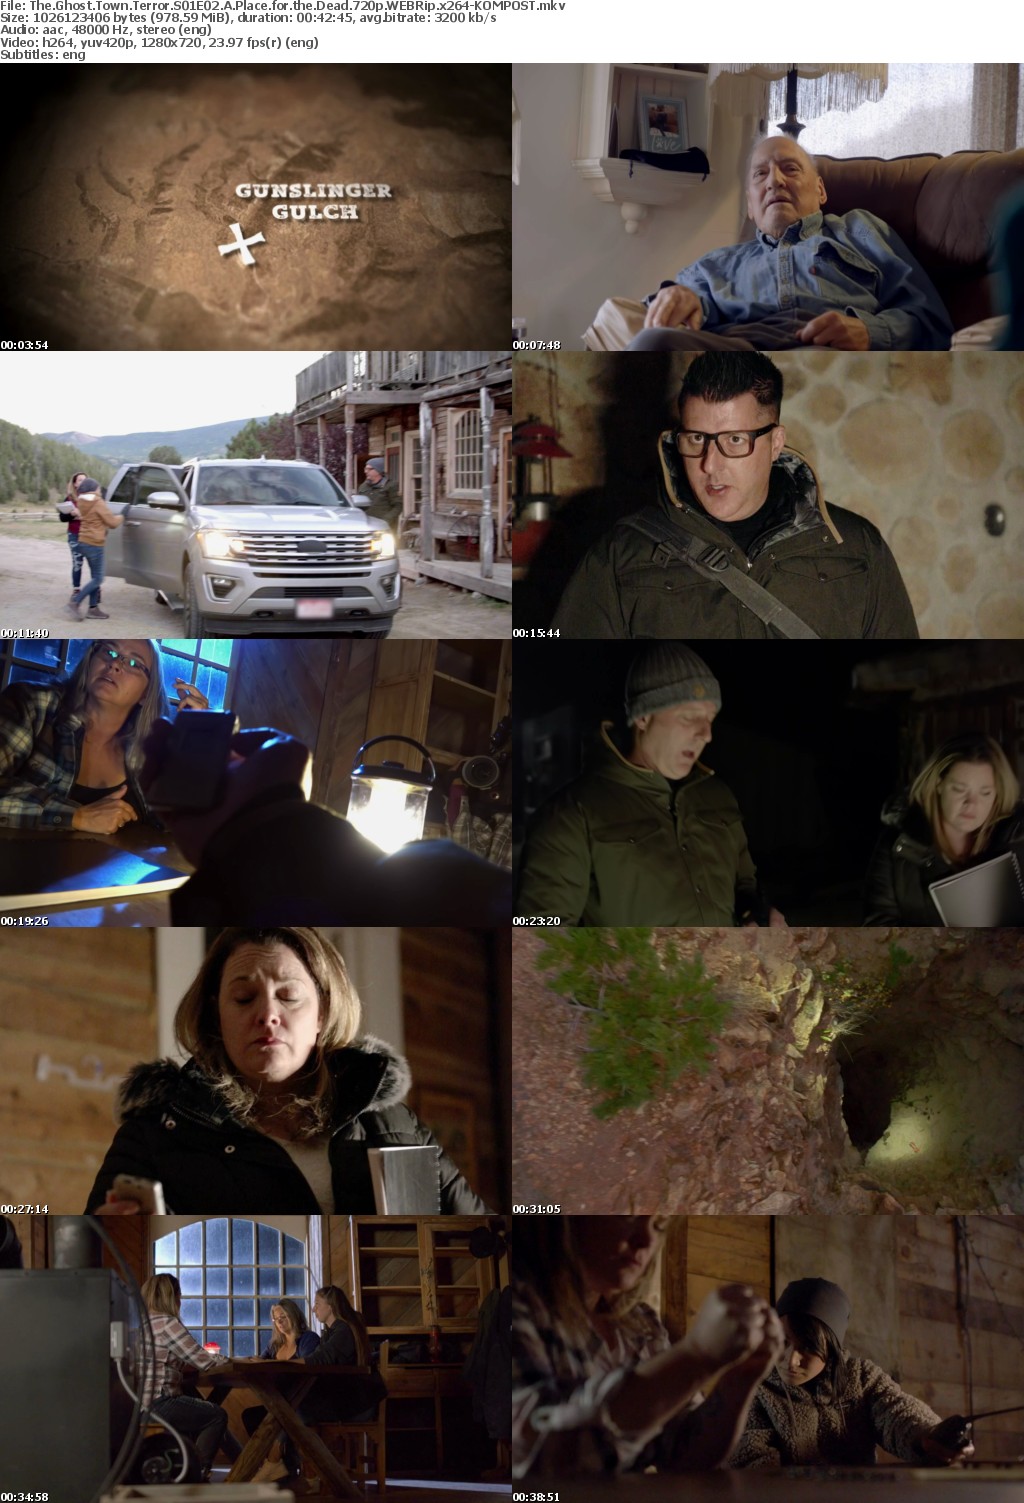 The Ghost Town Terror S01E02 A Place for the Dead 720p WEBRip x264-KOMPOST